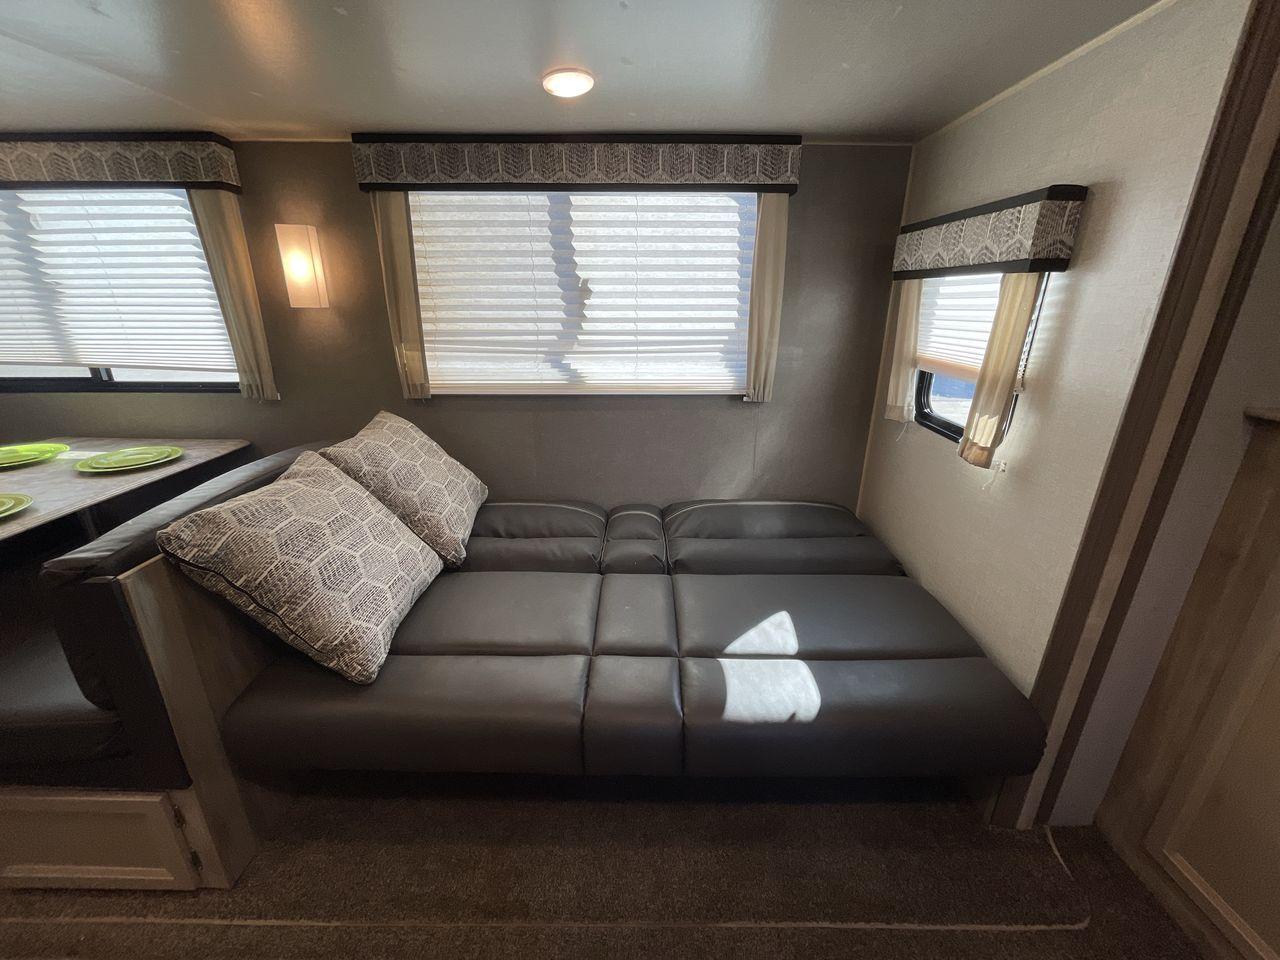 2021 COACHMEN CATALINA 243RBS (5ZT2CANBXMU) , Length: 28.75 ft. | Dry Weight: 5,692 lbs. | Gross Weight: 7,600 lbs. | Slides: 1 transmission, located at 4319 N Main St, Cleburne, TX, 76033, (817) 678-5133, 32.385960, -97.391212 - The 2021 Forest River Catalina 243RBS travel trailer offers a spacious floorplan that is truly comfortable and convenient. As you enter the trailer, you will find a cozy front bedroom with a lovely queen bed where you can relax and rejuvenate yourself after enjoying the great outdoors. You also have - Photo #19